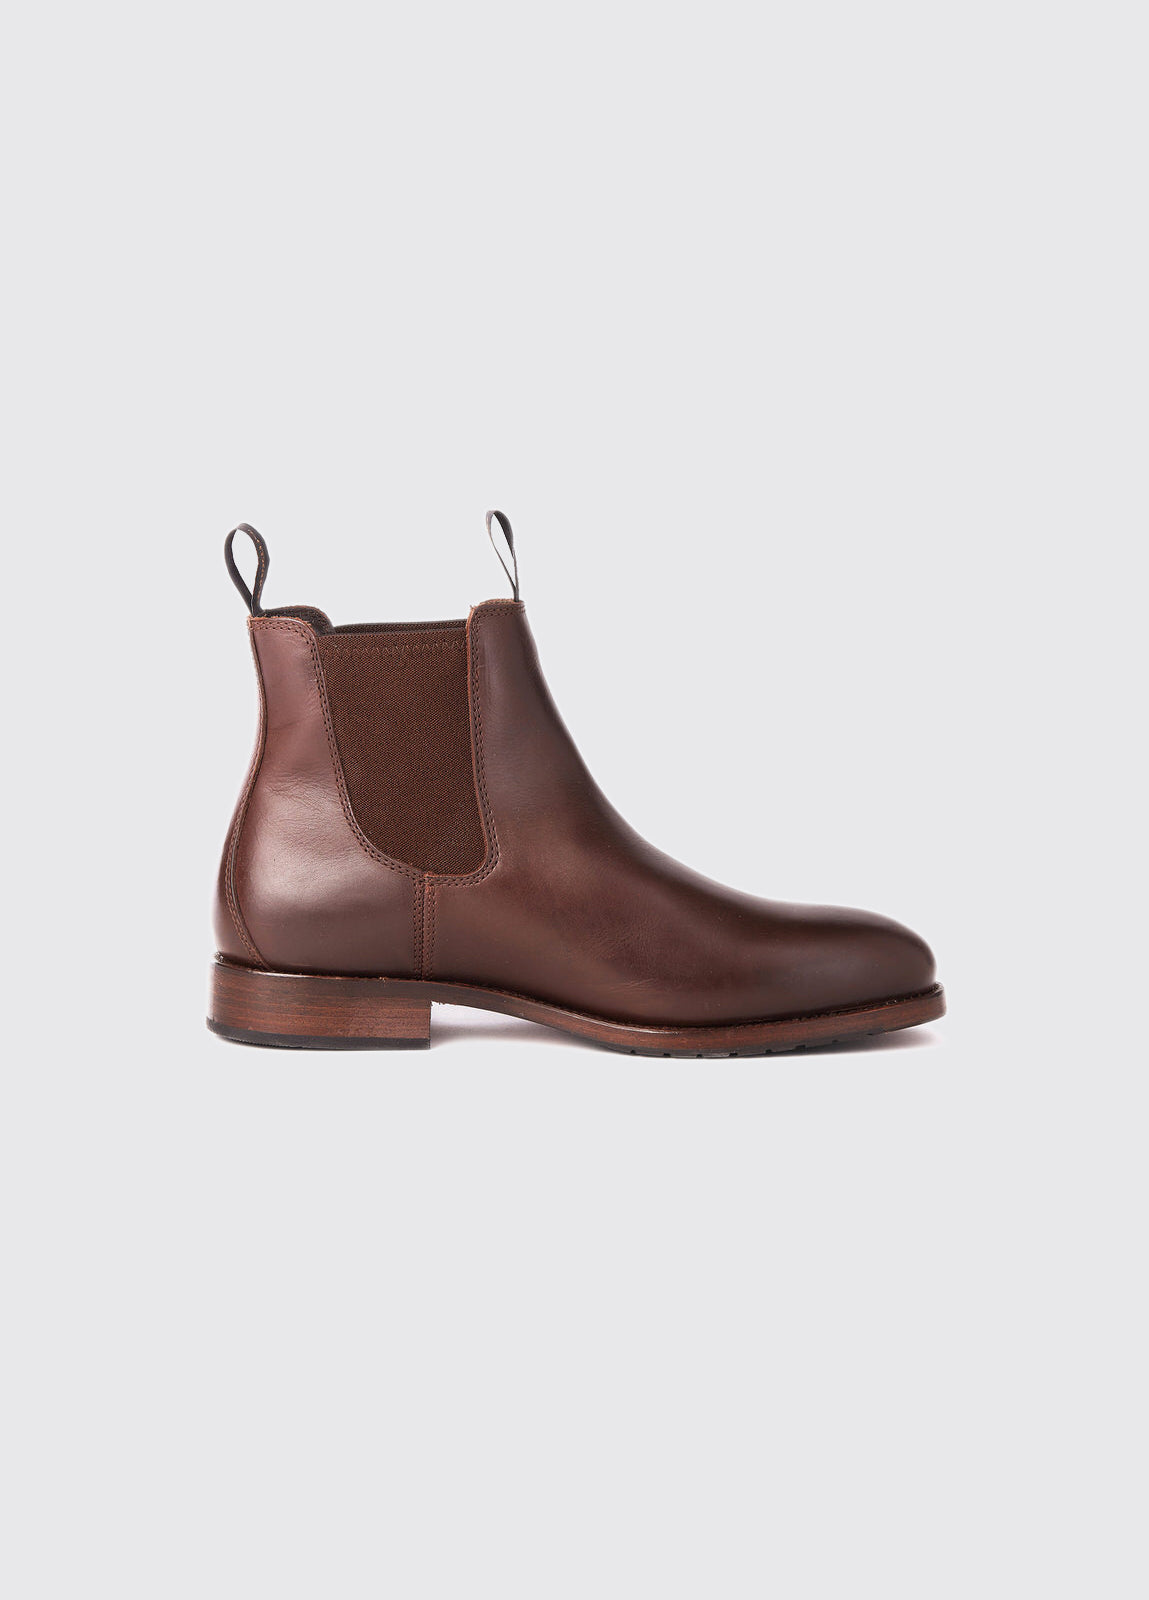 Kerry Leather Soled Boot - Mahogany